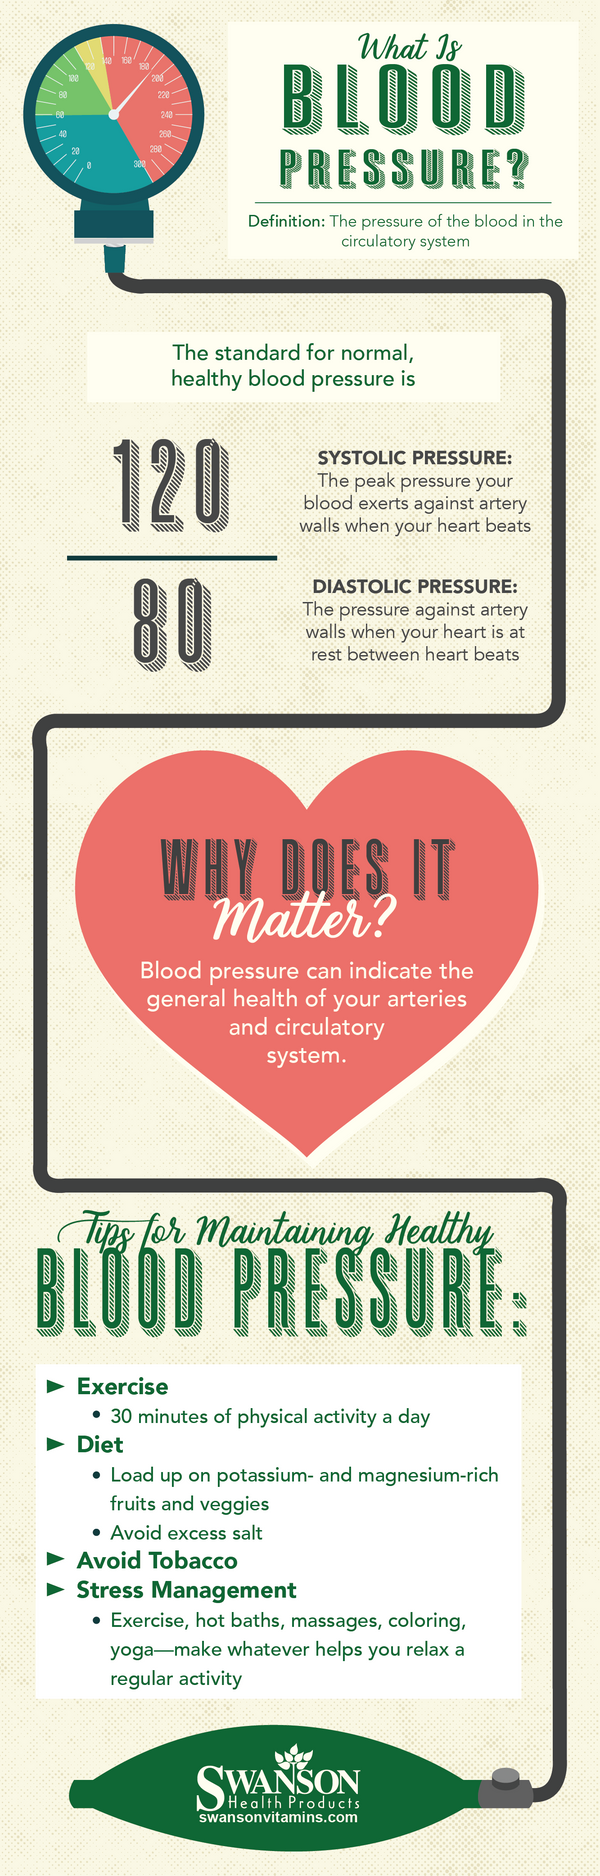 test-Do You Know Your Numbers? Find Out Why Blood Pressure Matters.